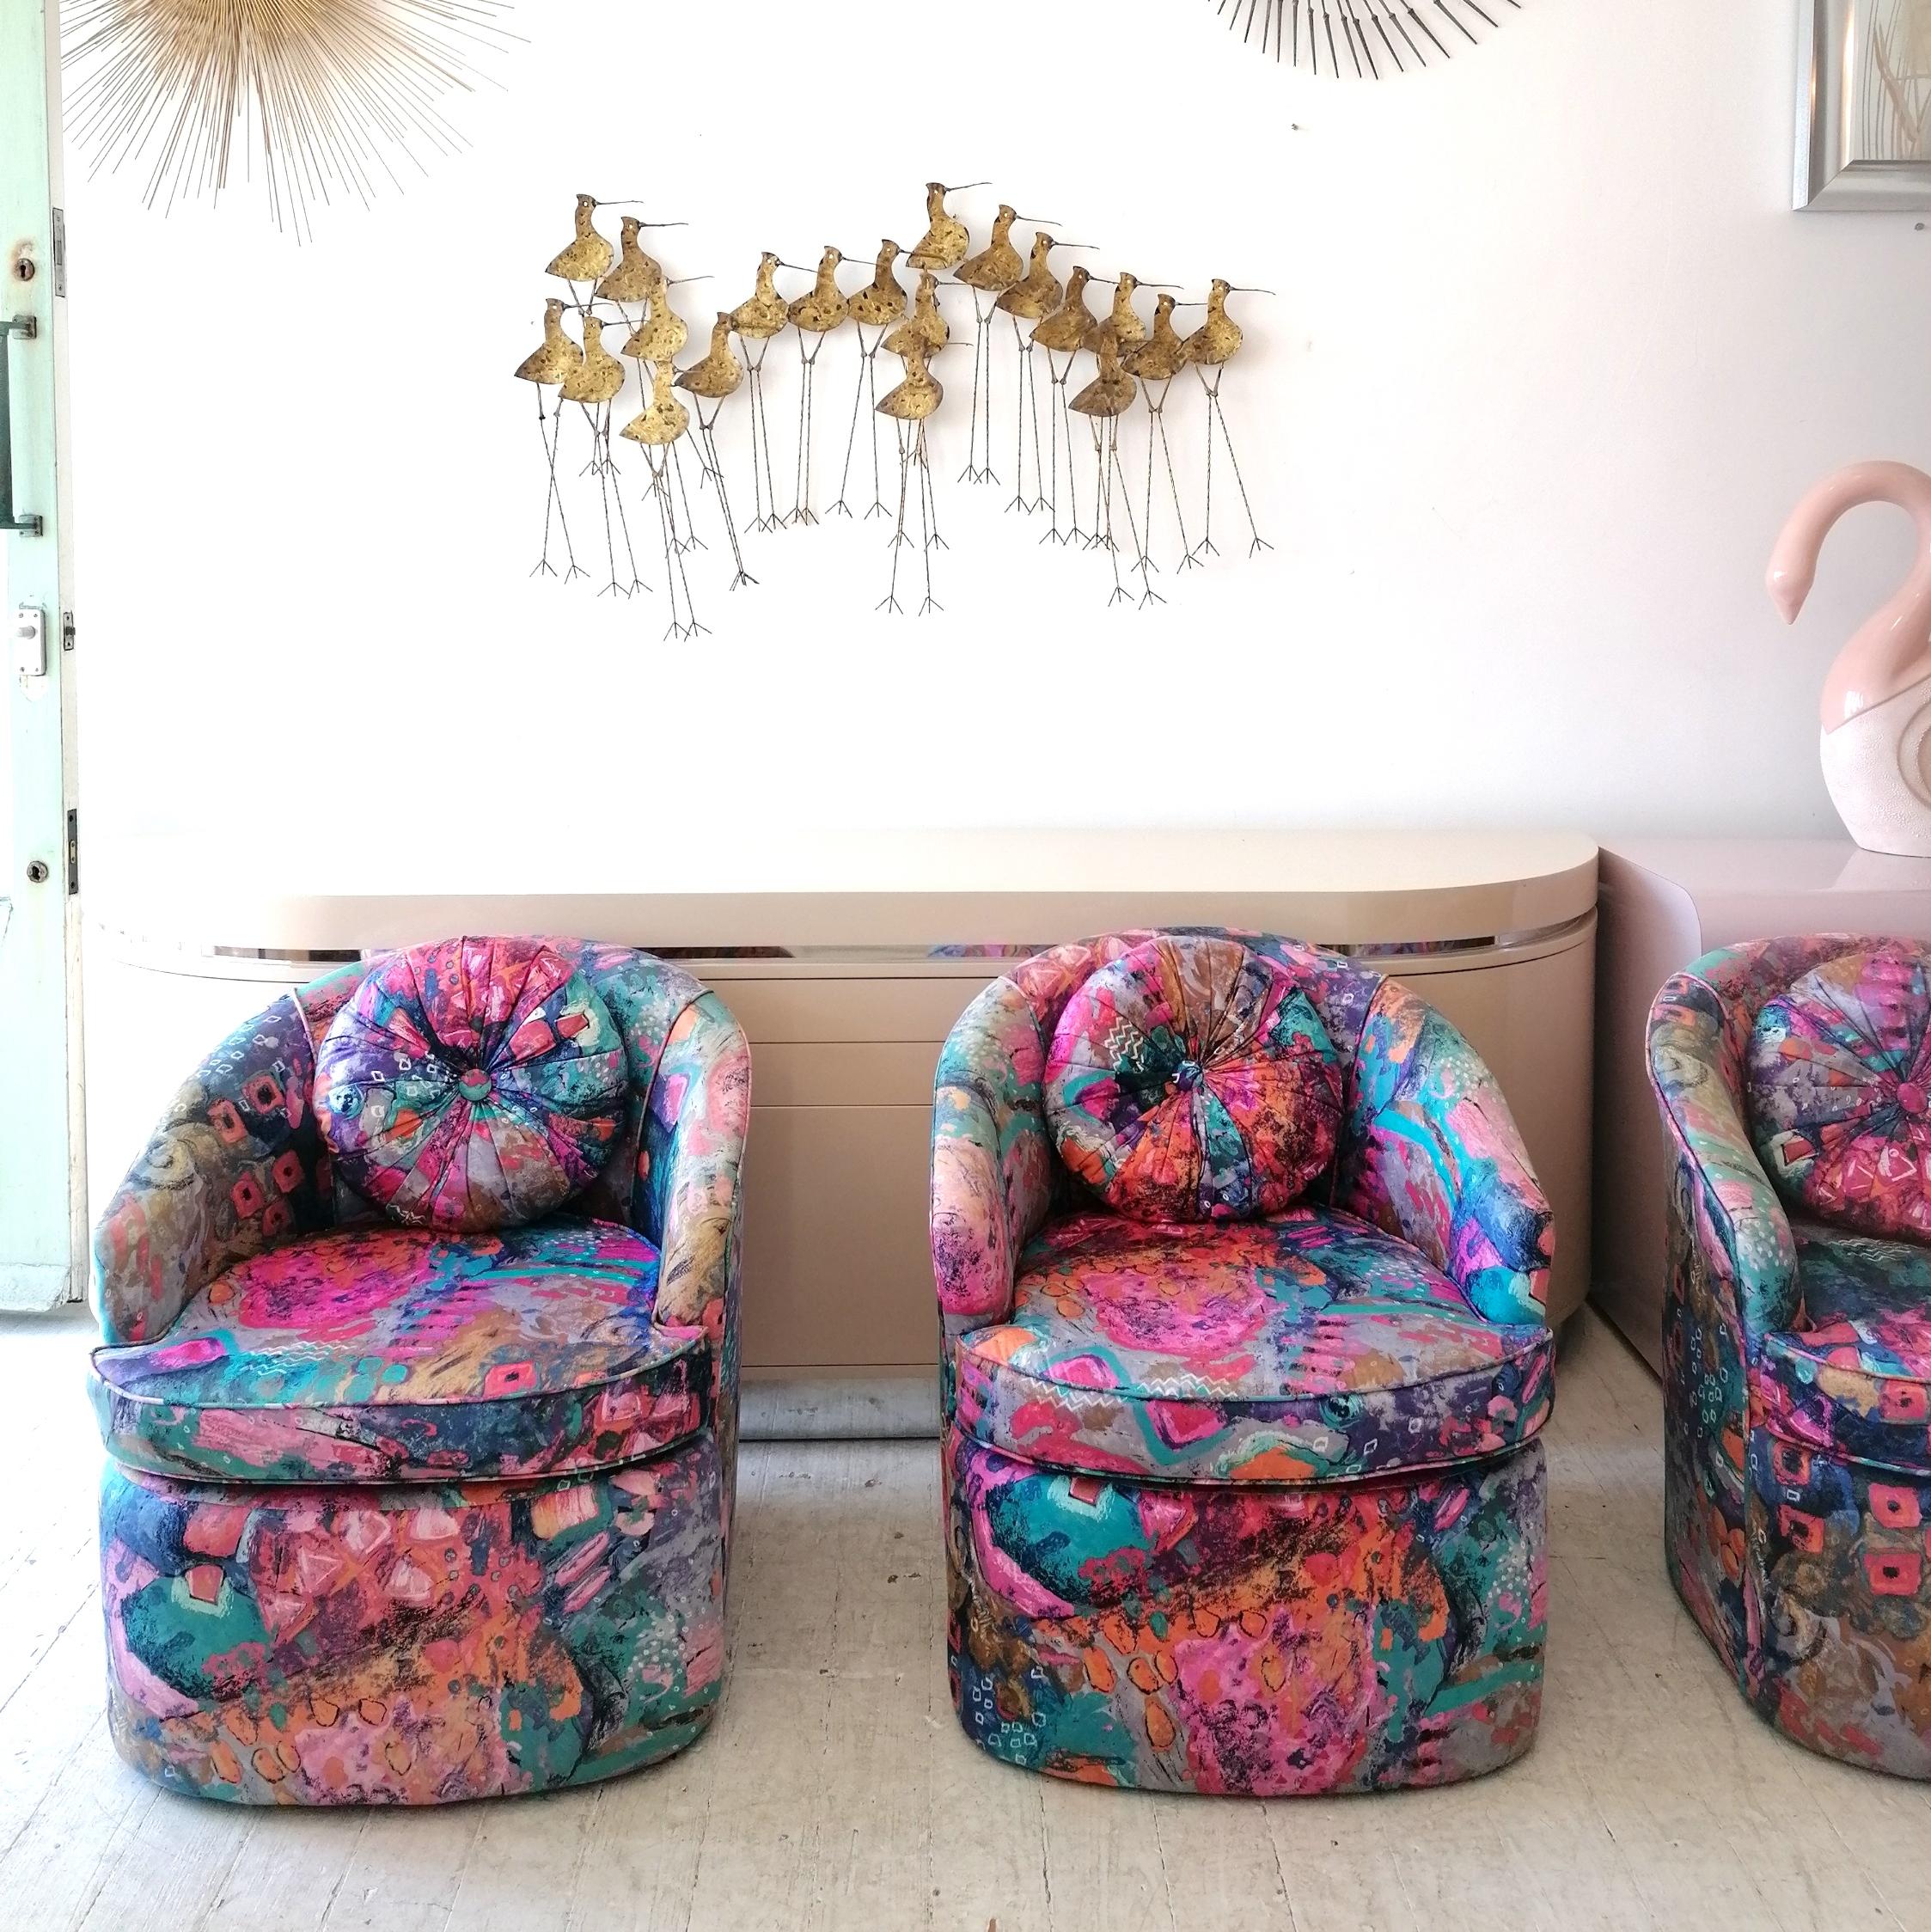 We have two of these amazing colourful armchairs on casters- this price is for ONE. Please select more from the drop-down menu if you'd like to buy more than one.
The original abstract-patterned upholstery is in excellent condition. 1980s American.